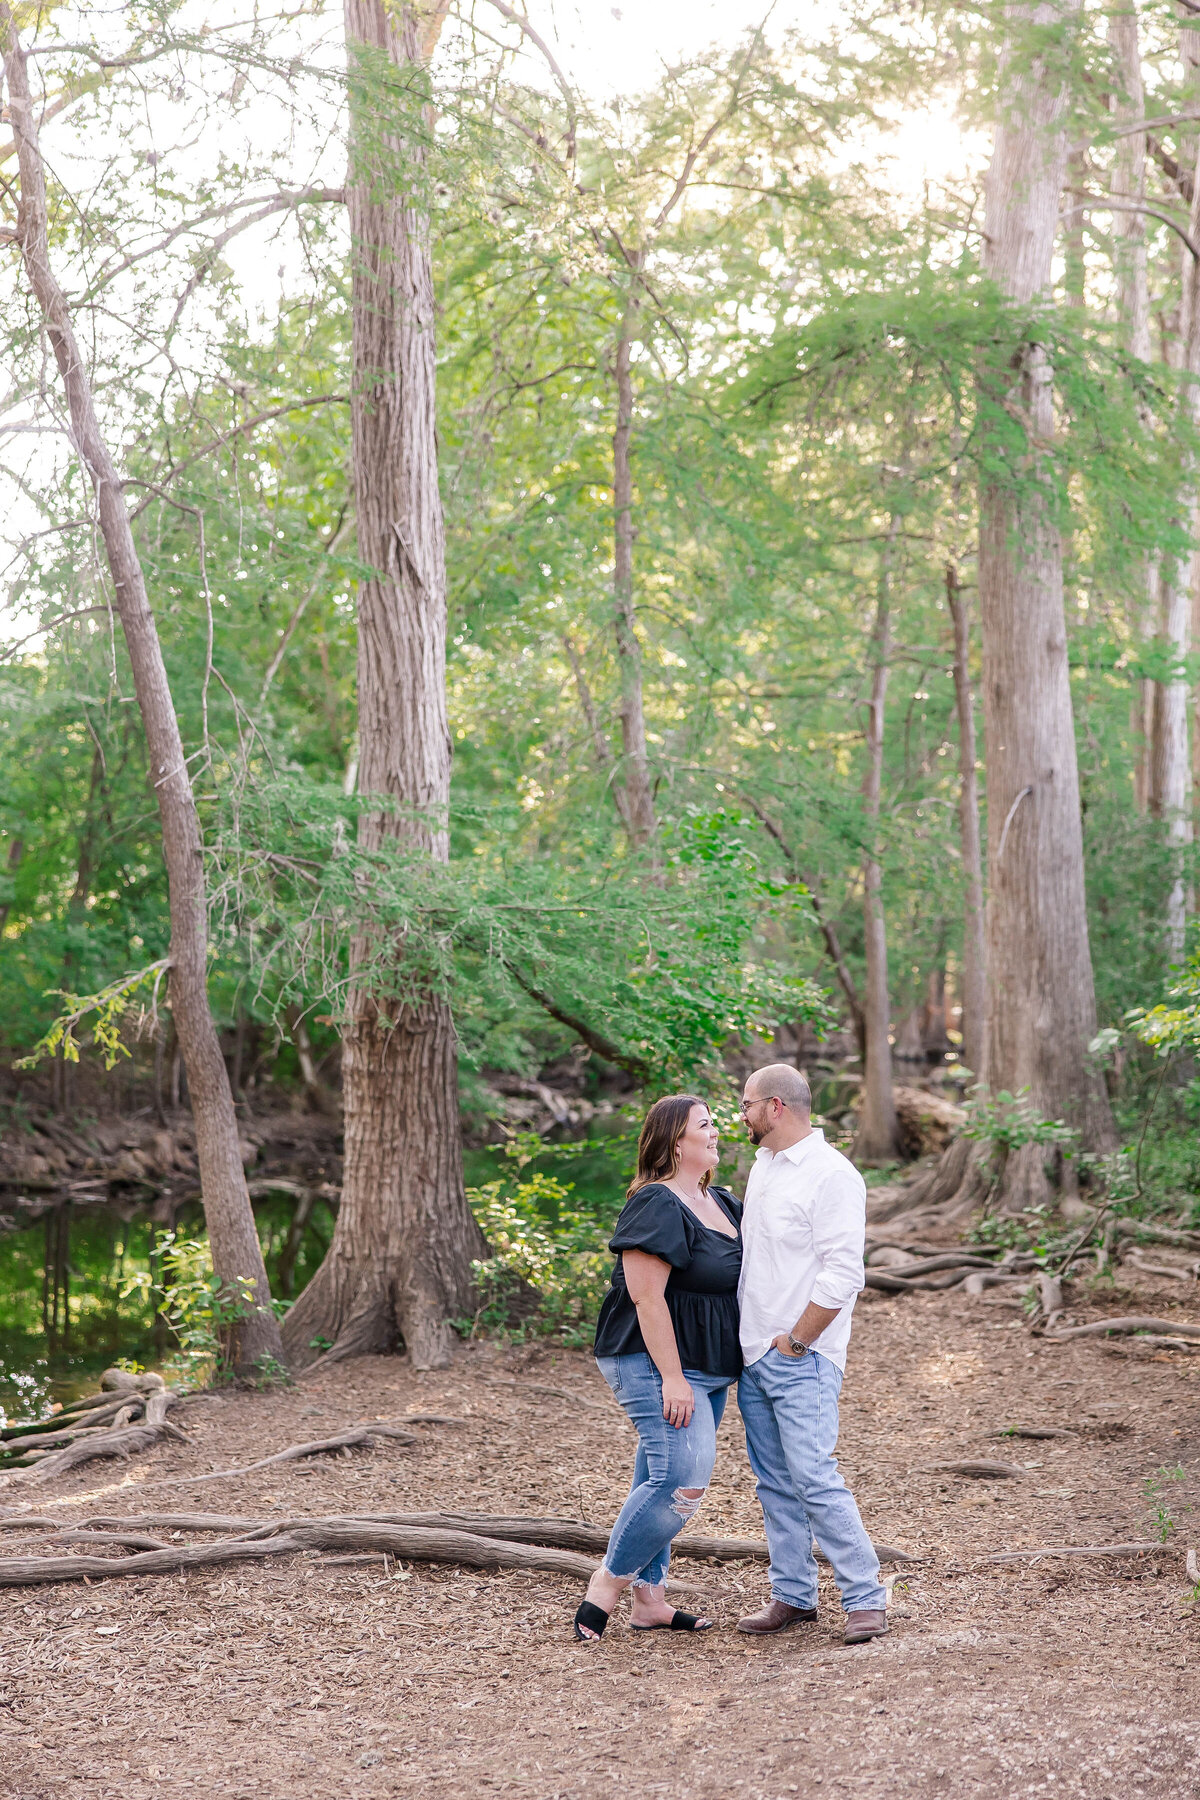 wedding engagement session among cypress trees in boerne Texas by photographer Firefly